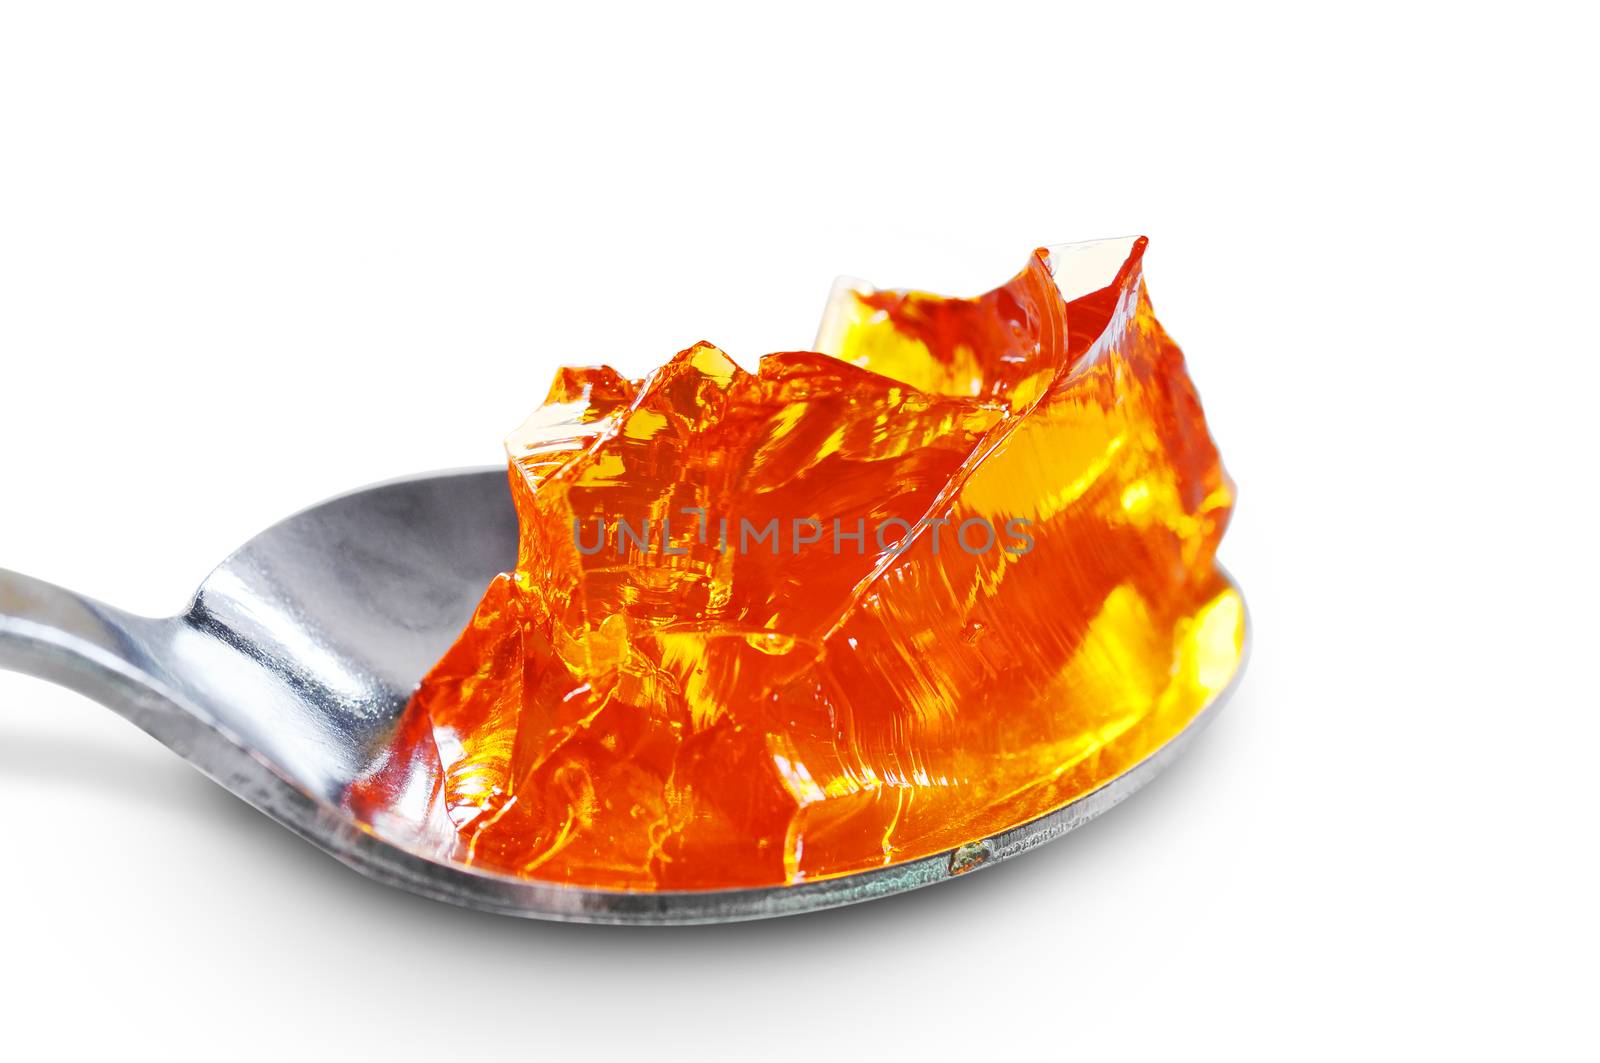 Macro of spoon full of orange jelly or gelatin, on white with shadow